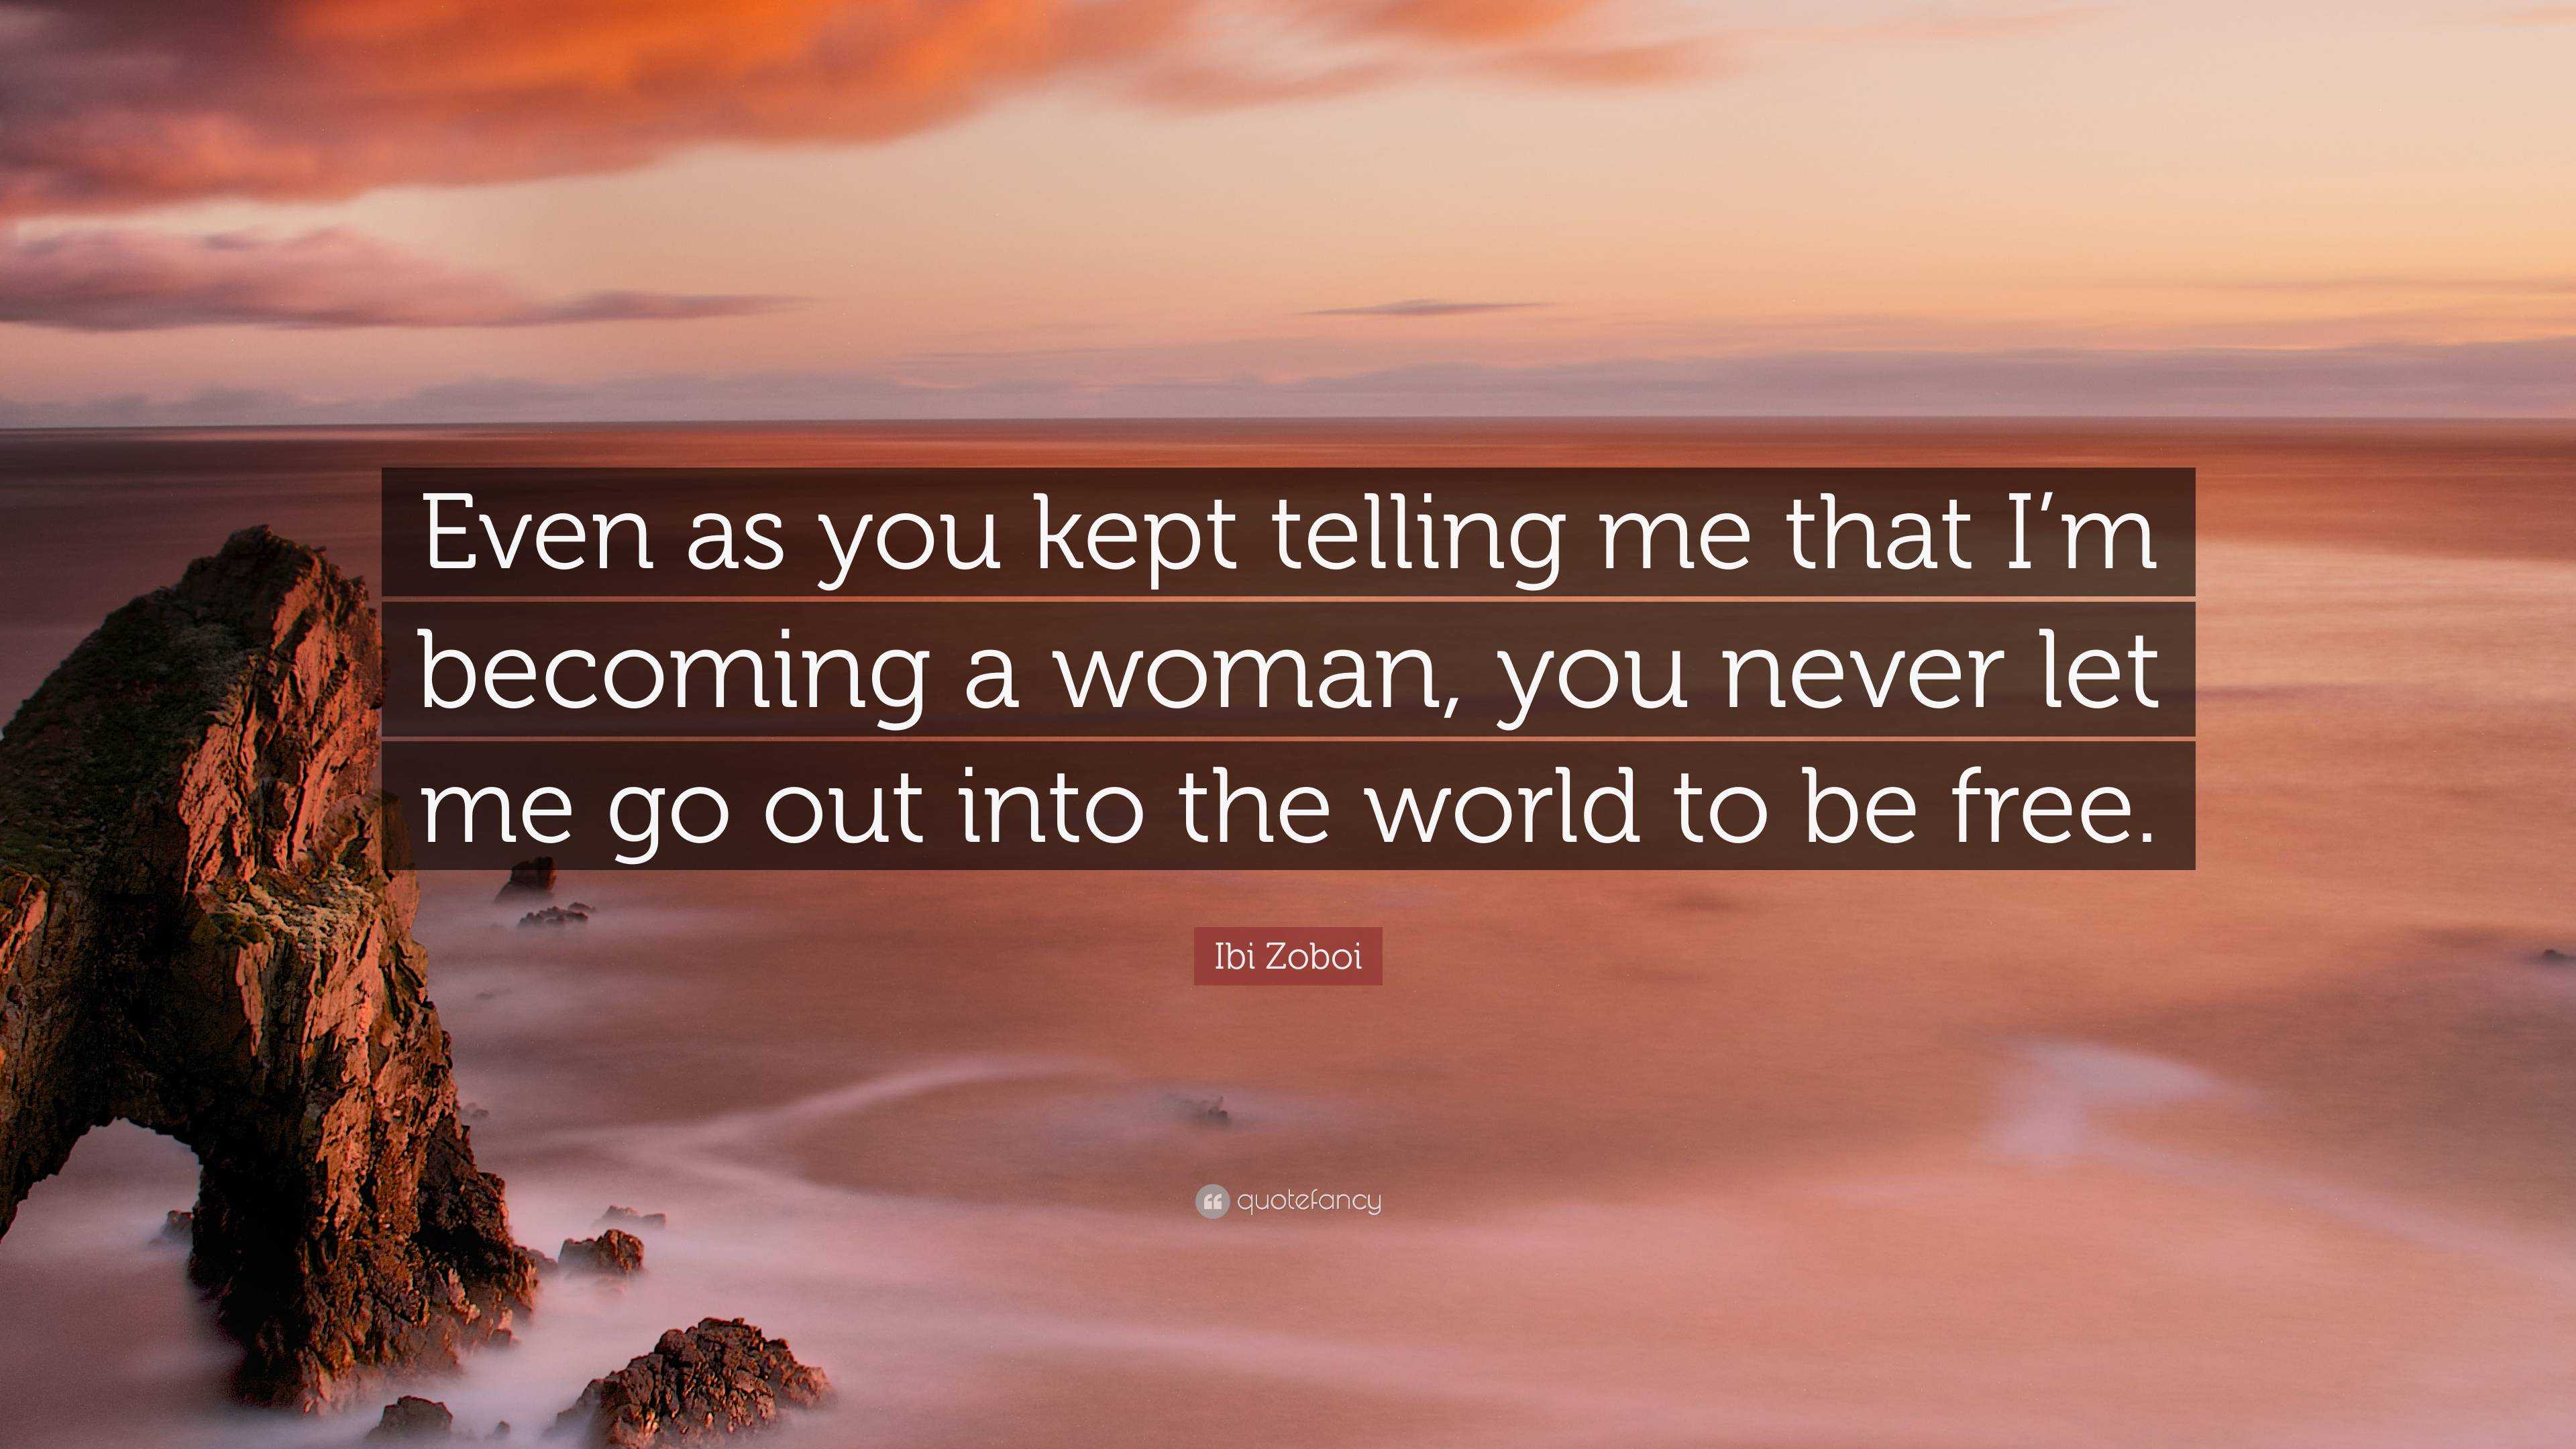 Ibi Zoboi Quote: “Even as you kept telling me that I’m becoming a woman ...